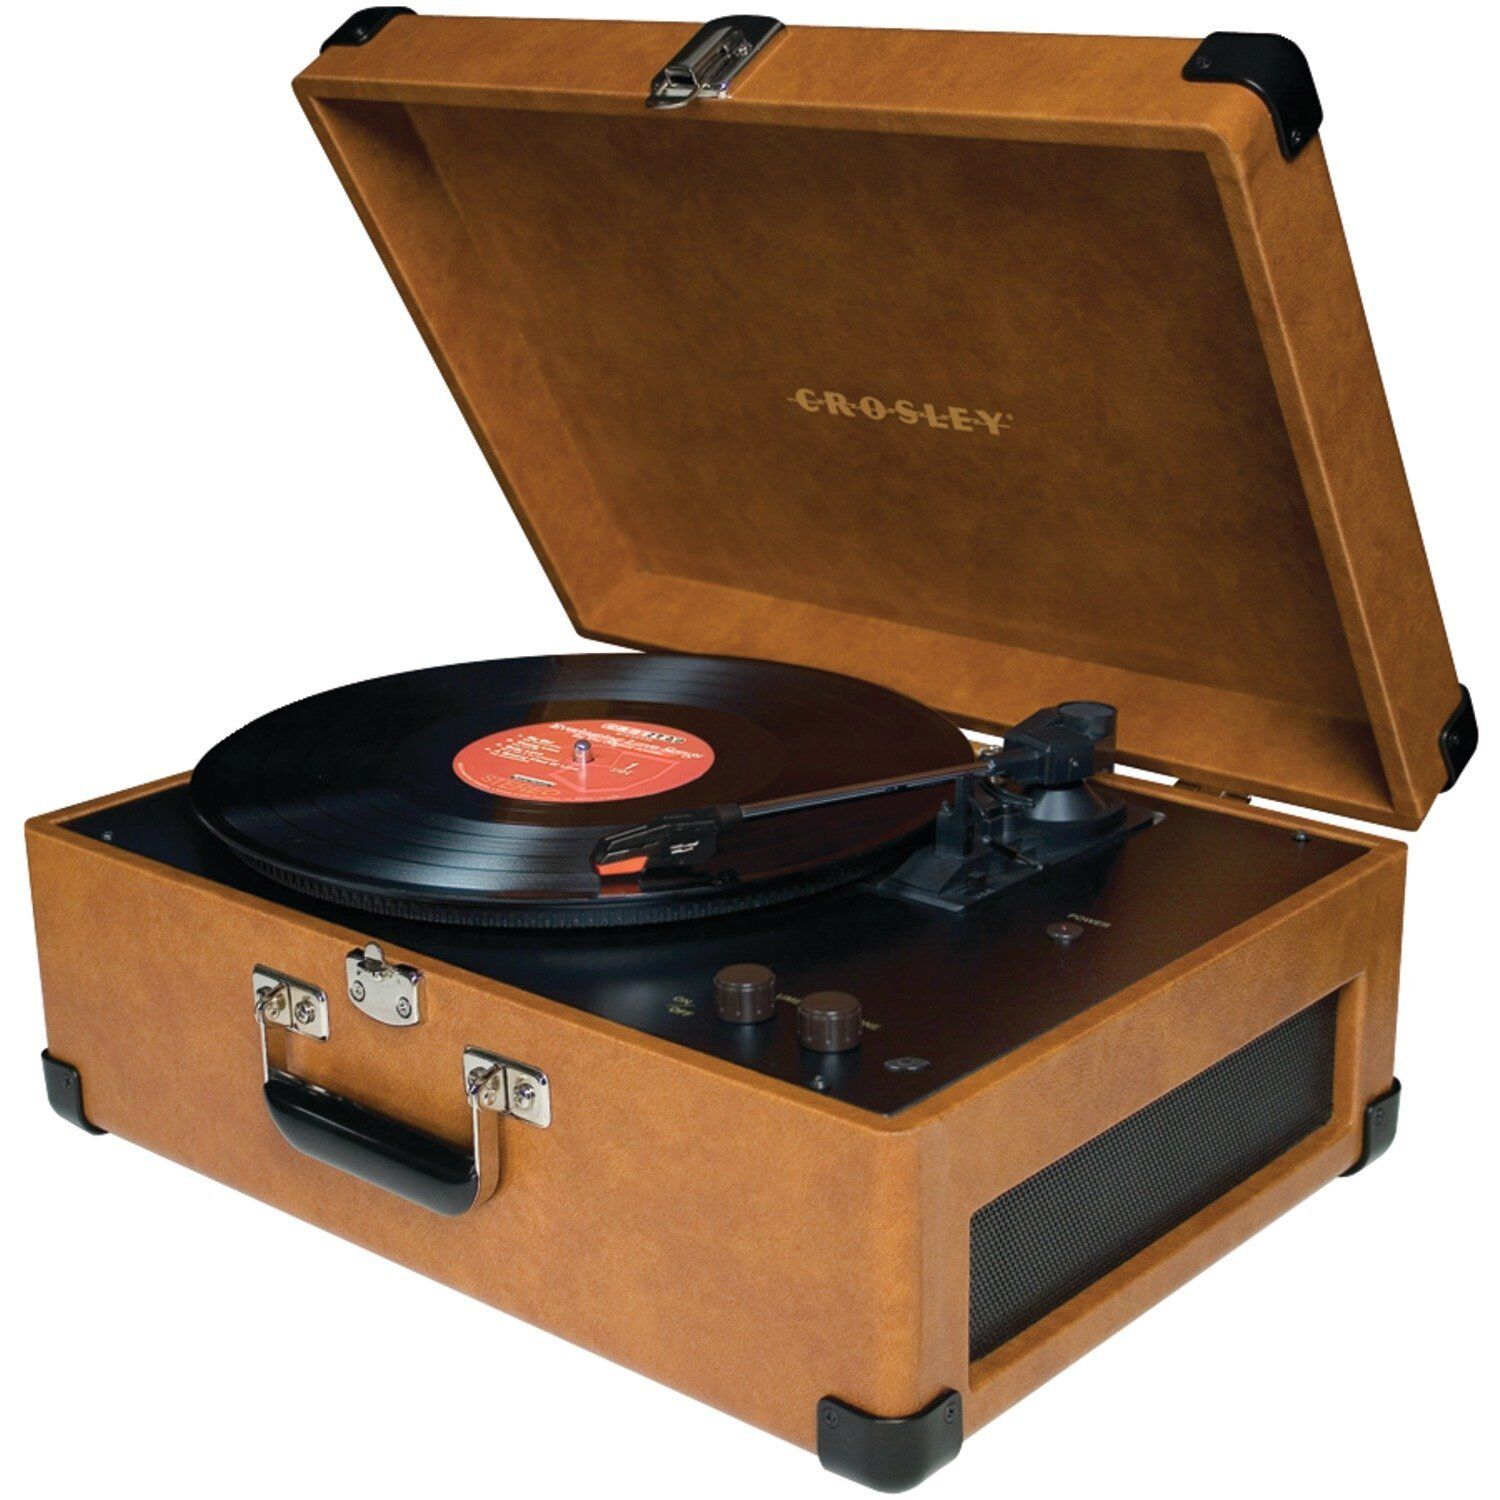 New TAN Crosley Deluxe Keepsake record player - turns old albumsl to CDS